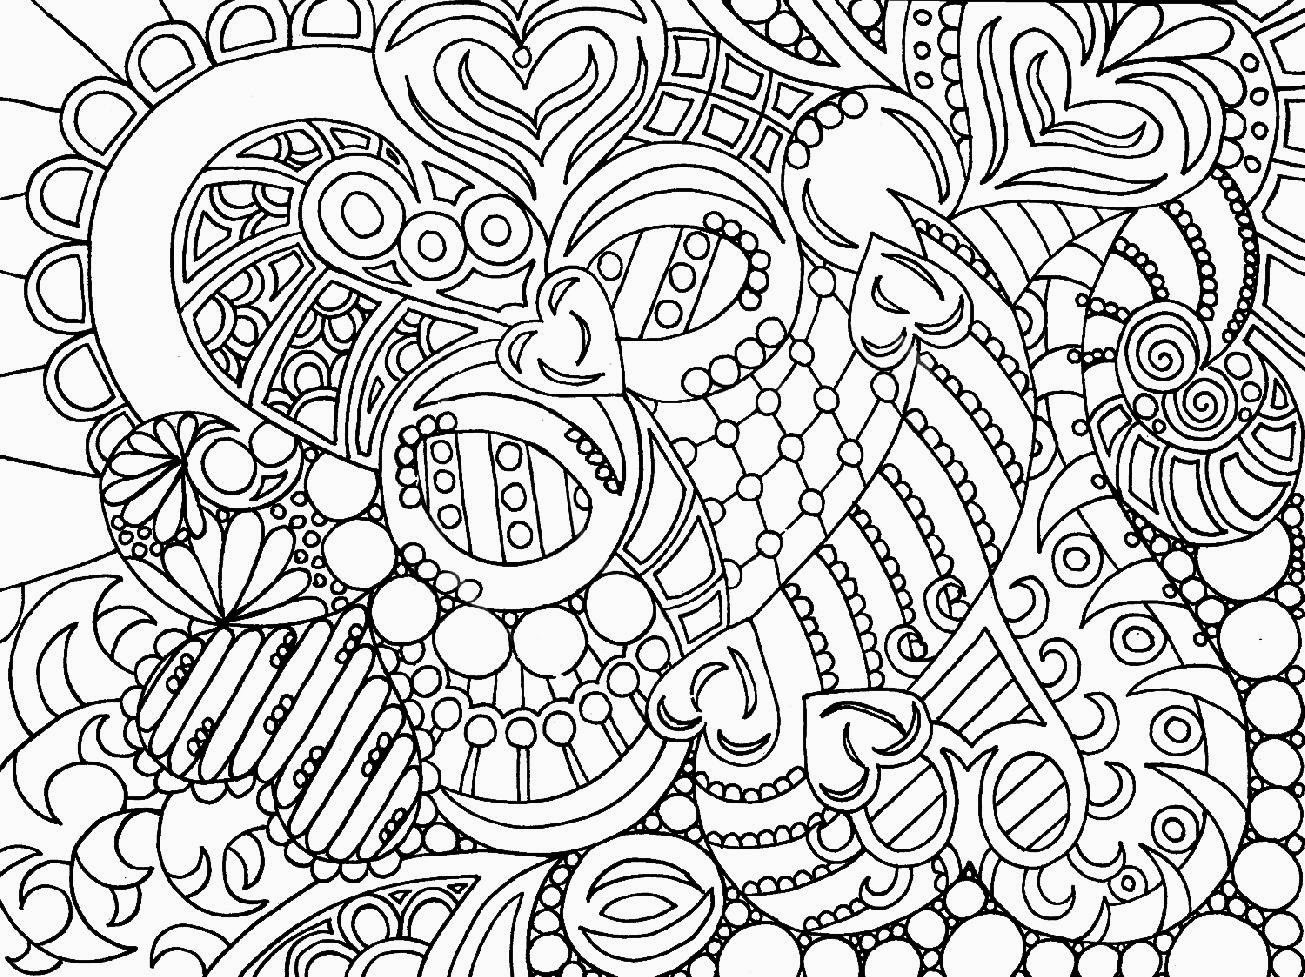 Printable Adult Coloring Pages Free
 Adult Coloring Sheets